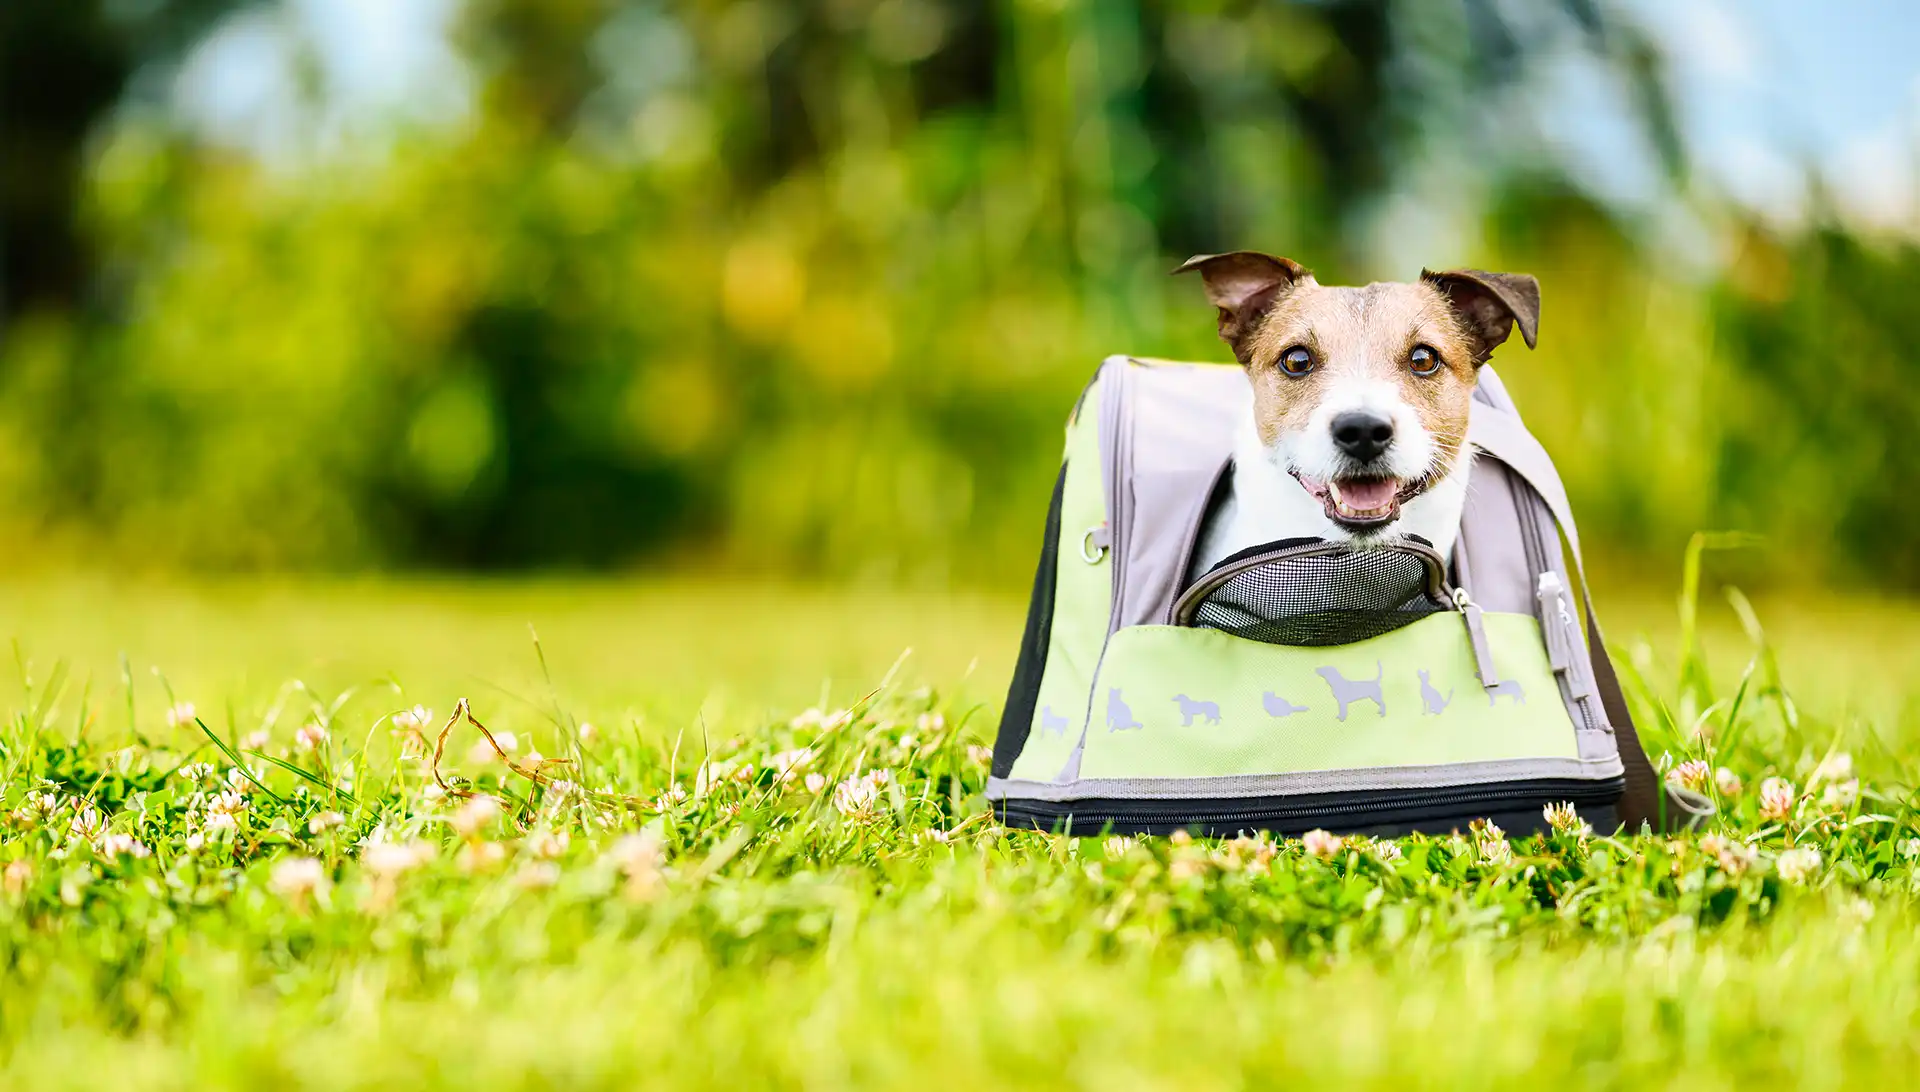 Jack Russell dog sitting in a dog carrier outside in the grass.